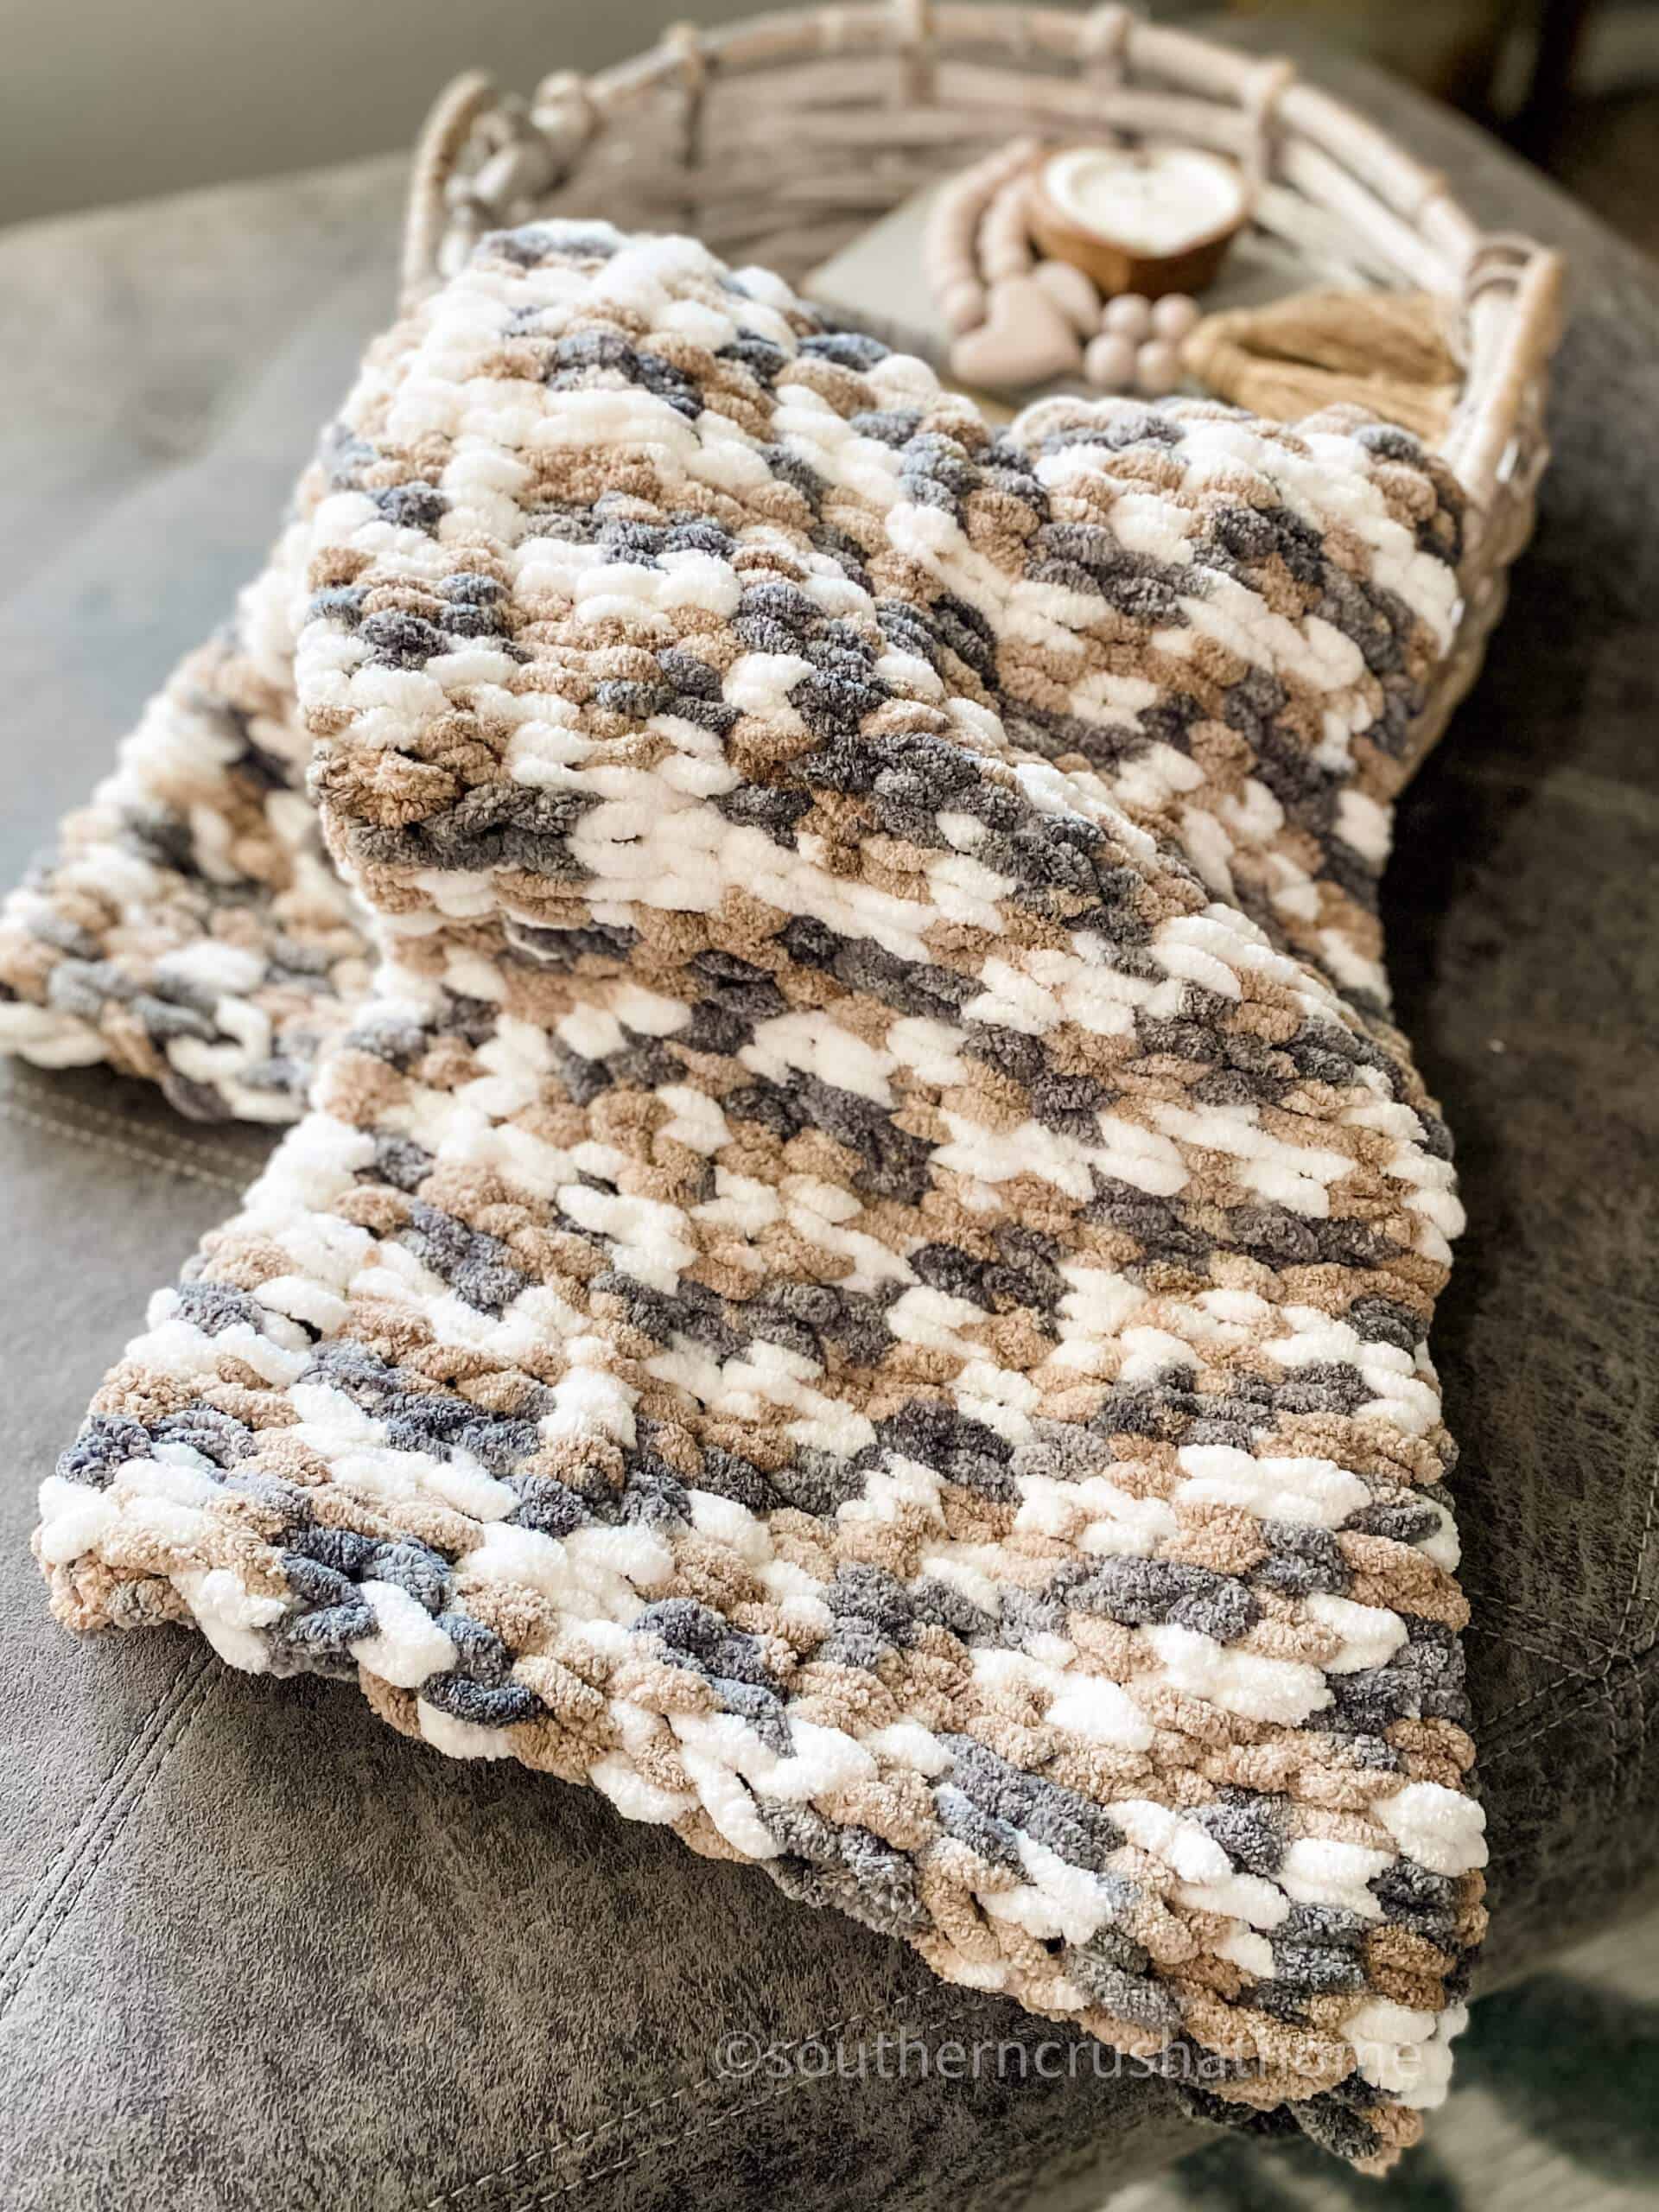 Easy DIY Knit Blanket - No Sewing Required!